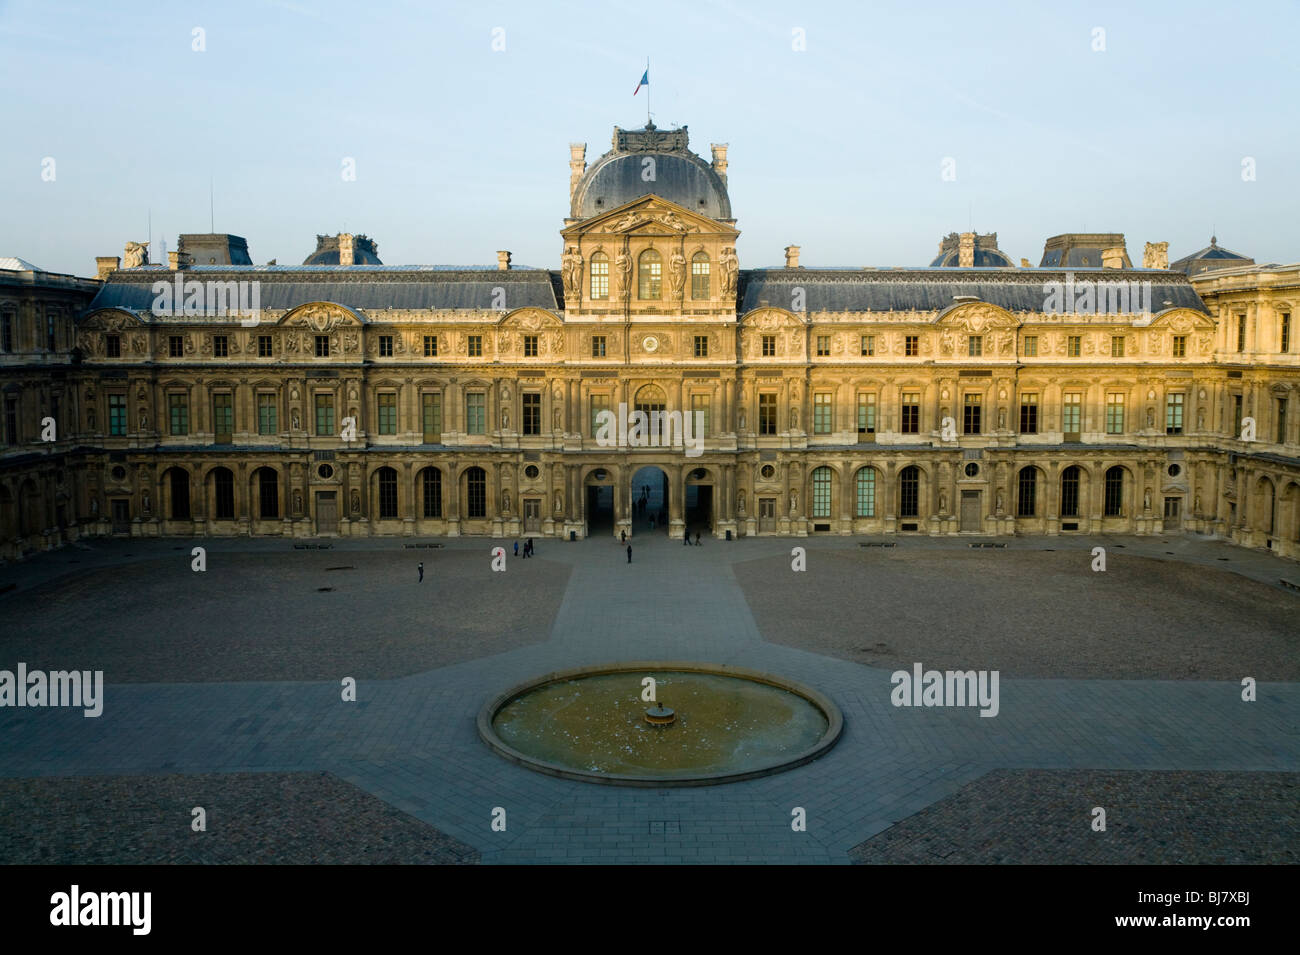 Dawn and sunrise over an internal open air courtyard of The Louvre Museum / Musee / Palais du Louvre. Paris, France. Stock Photo